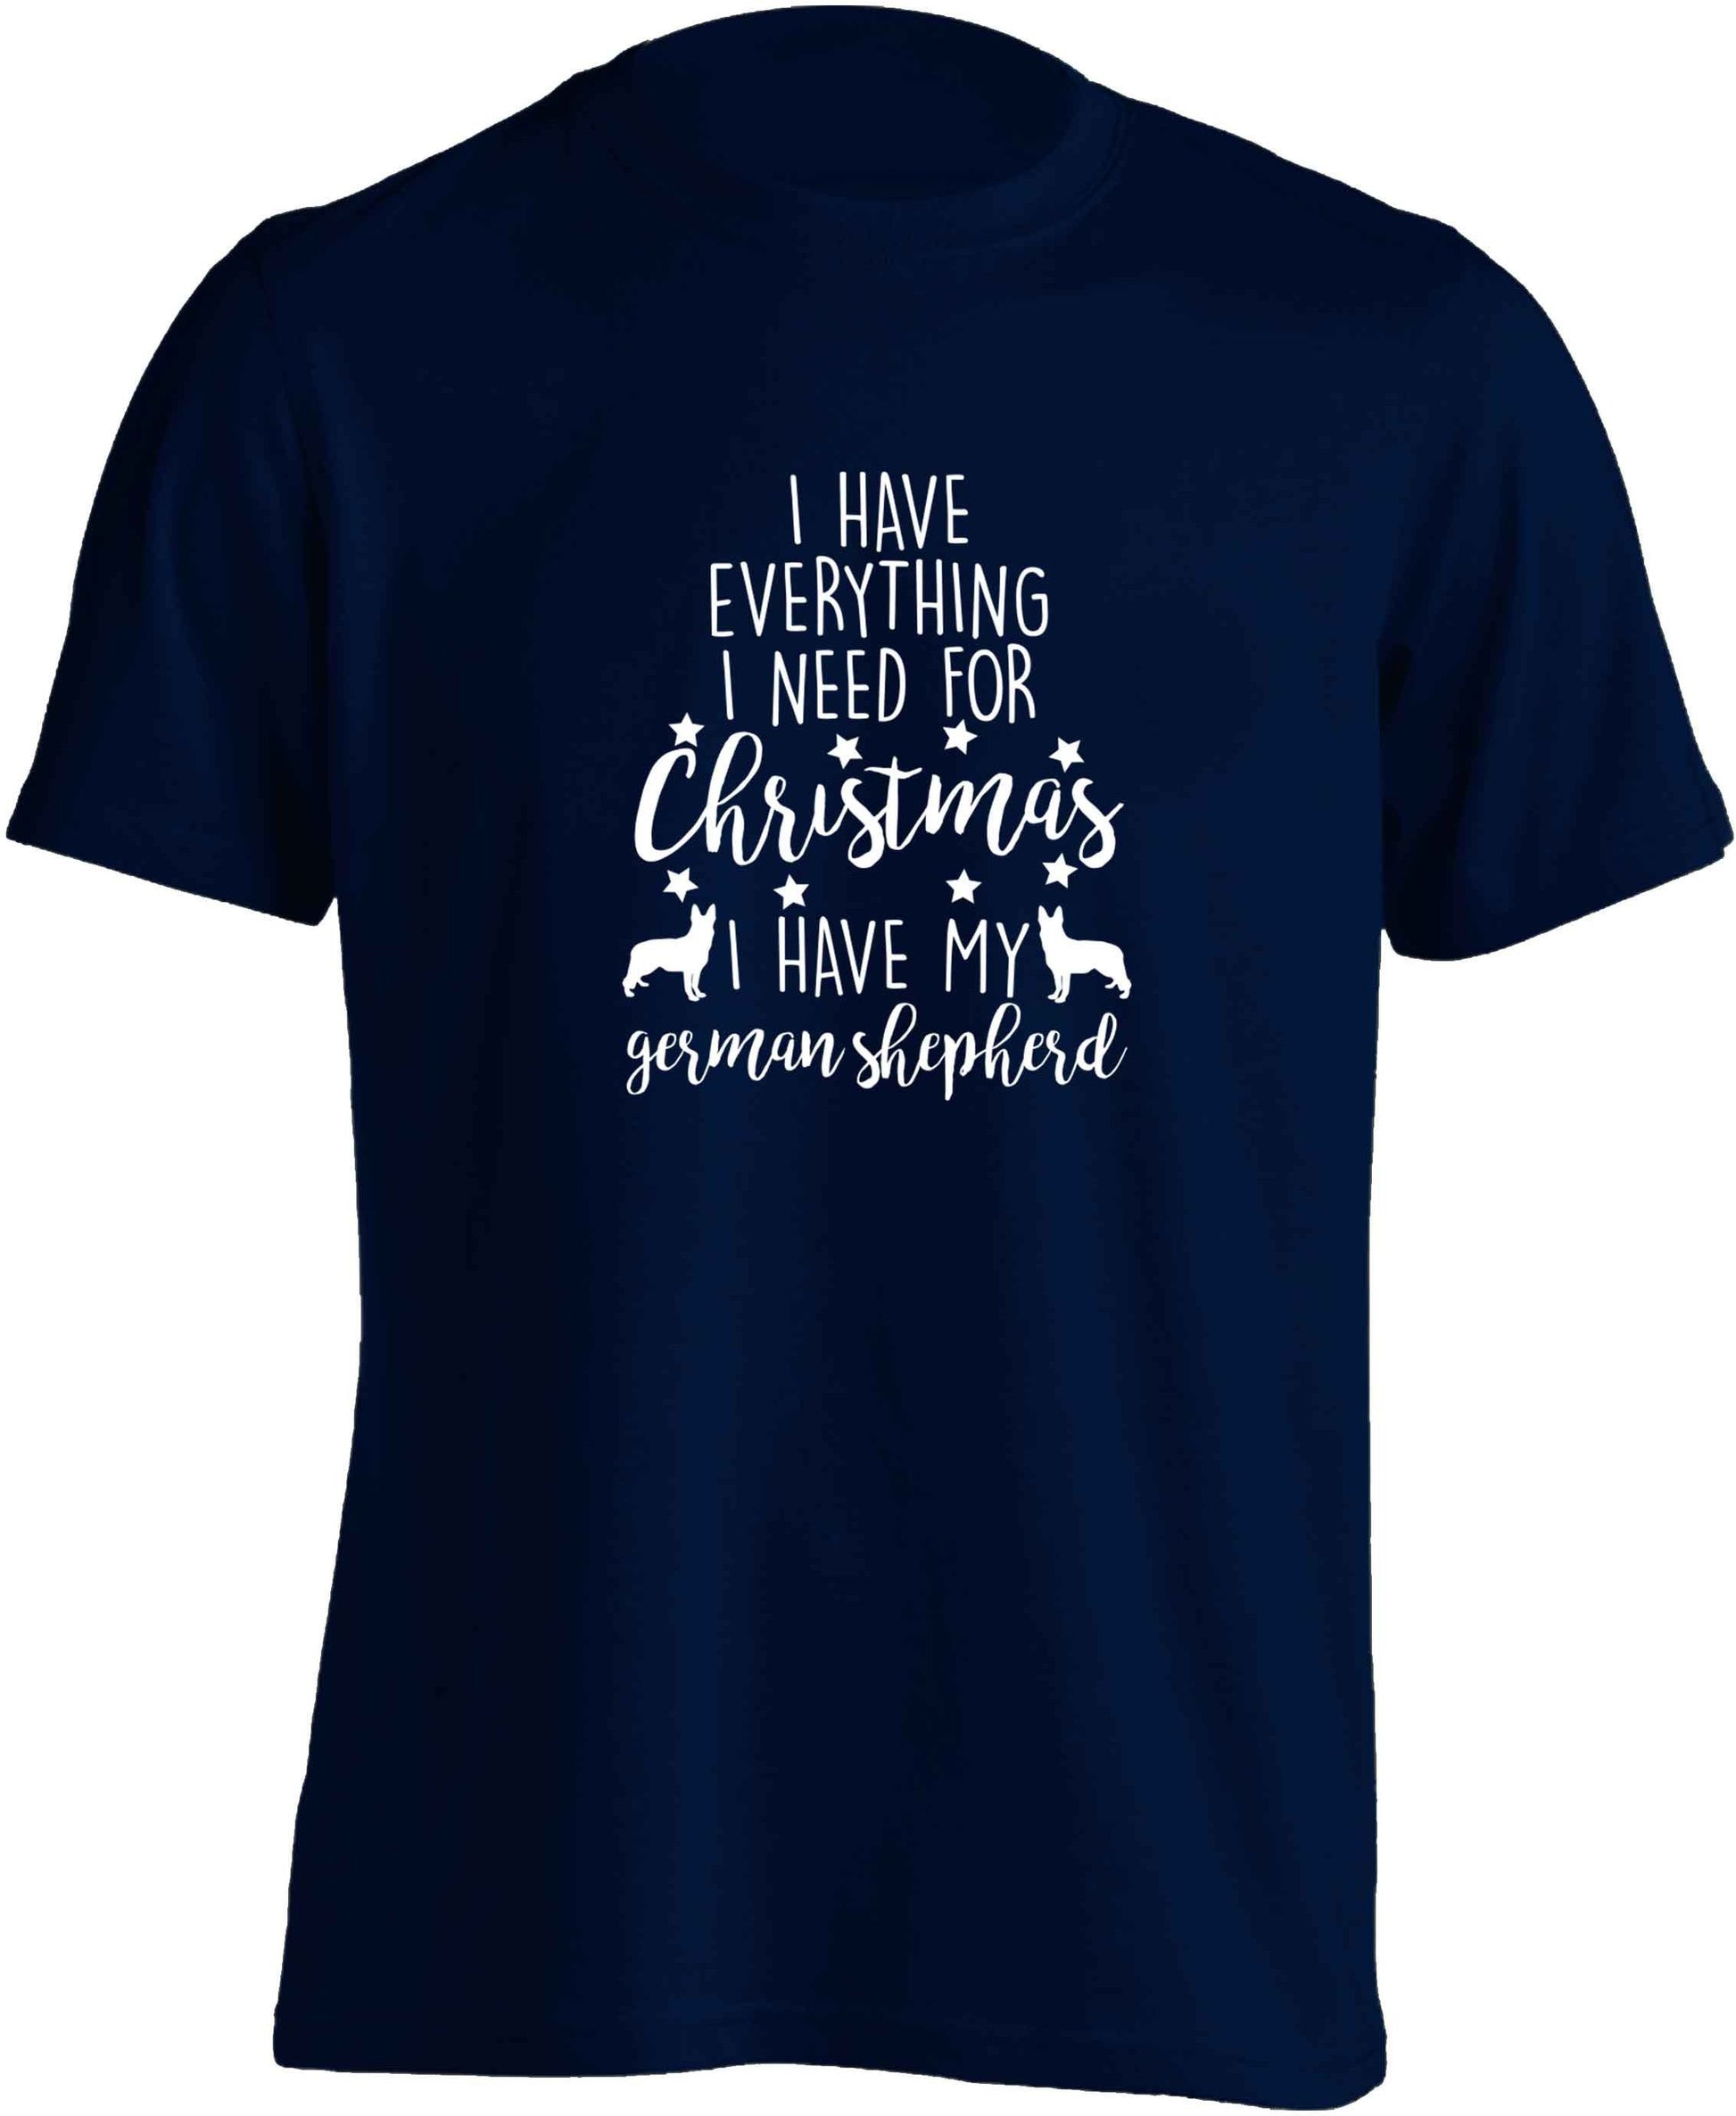 I have everything I need for Christmas I have my german shepherd adults unisex navy Tshirt 2XL